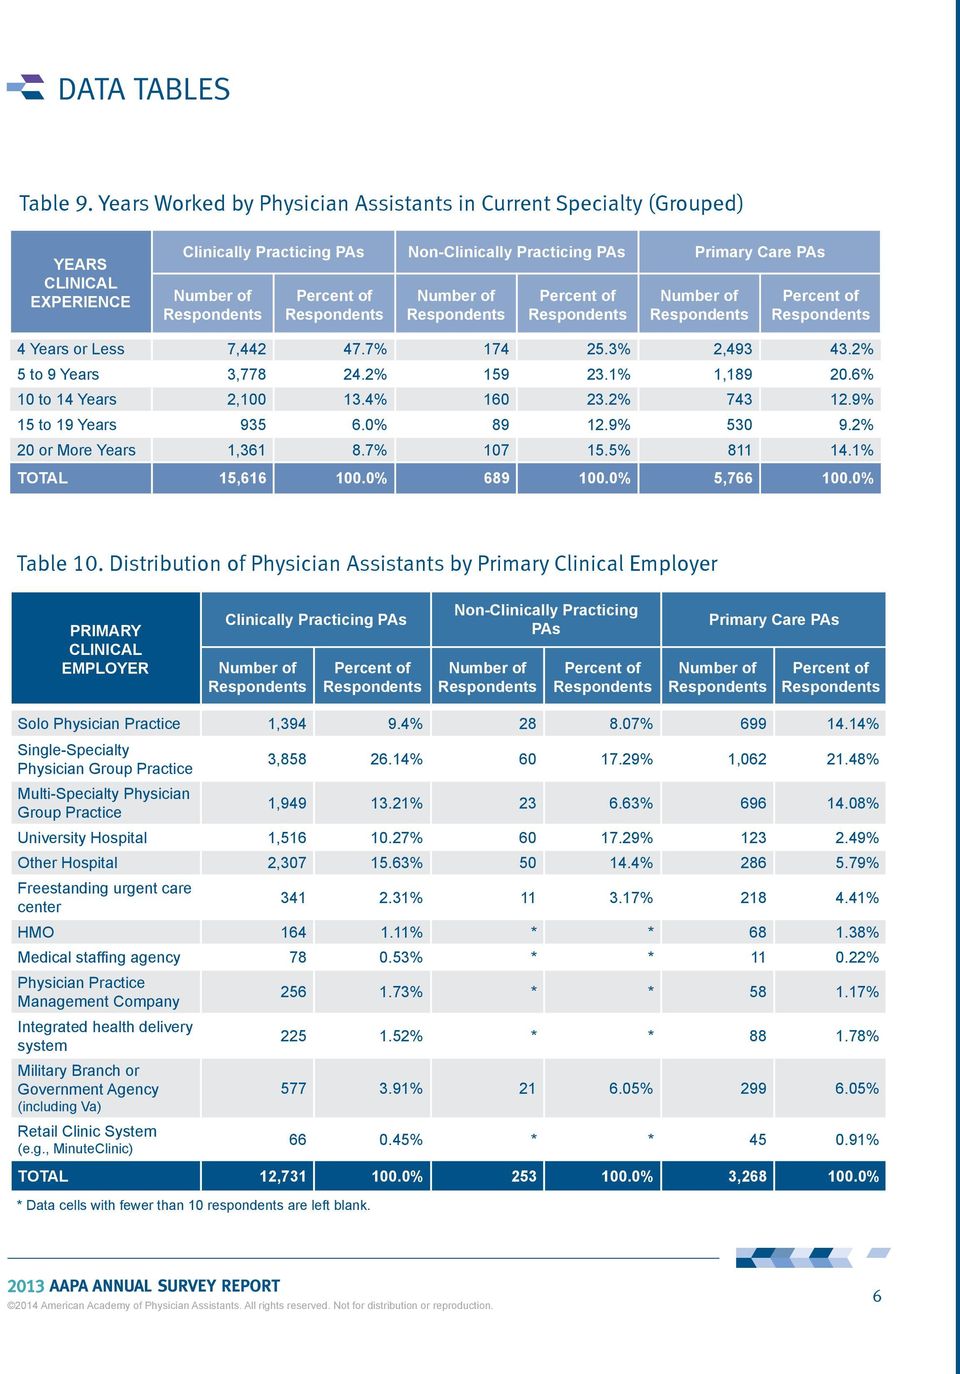 Distribution of Physician Assistants by Primary Clinical Employer PRIMARY CLINICAL EMPLOYER Clinically Practicing PAs Non-Clinically Practicing PAs Primary Care PAs Solo Physician Practice 1,394 9.